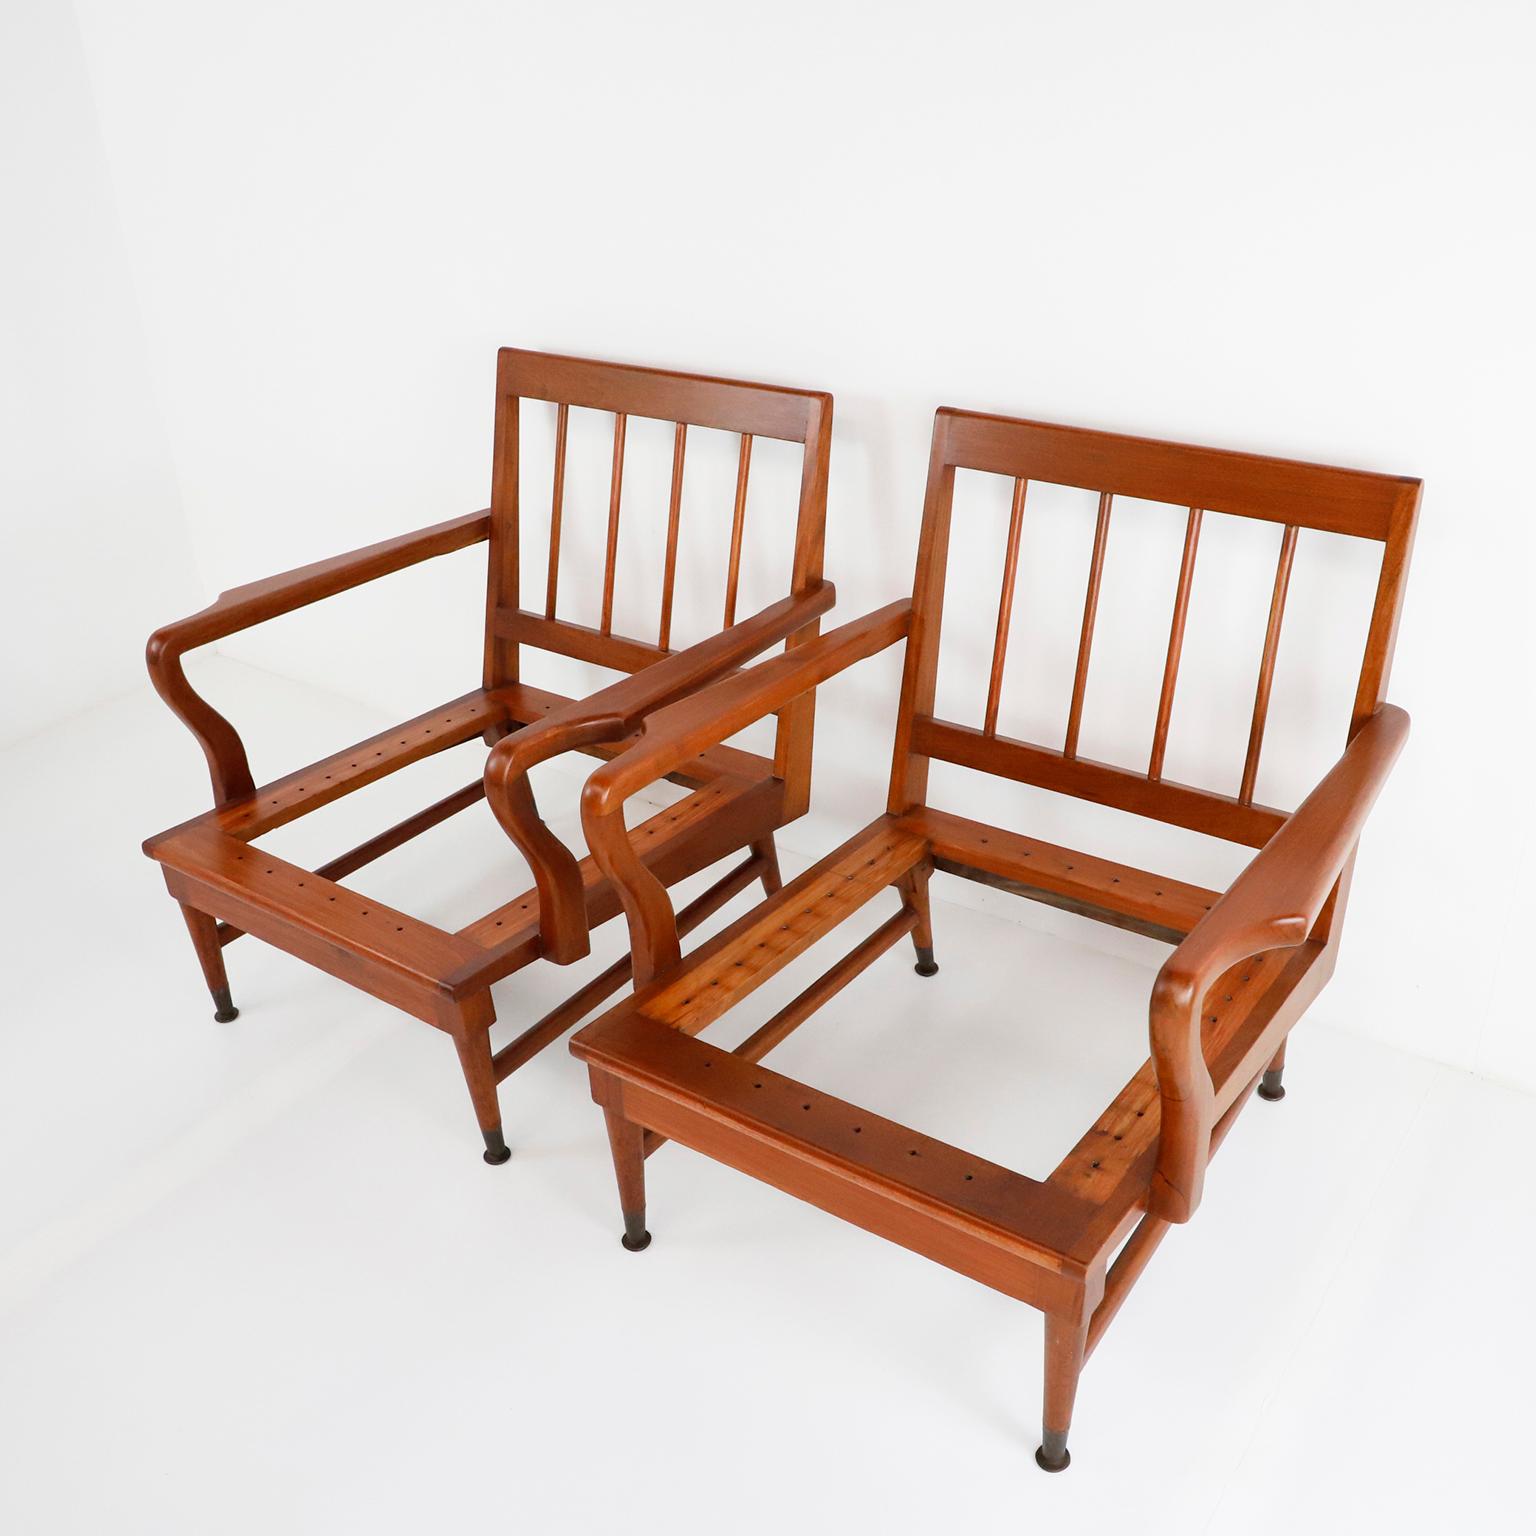 Made in solid mahogany We offer this Pair of Mexican Mid-Century Modern armchairs made in the 1950s. Featuring simple but elegant modern frames. Great vintage condition and recently restored.